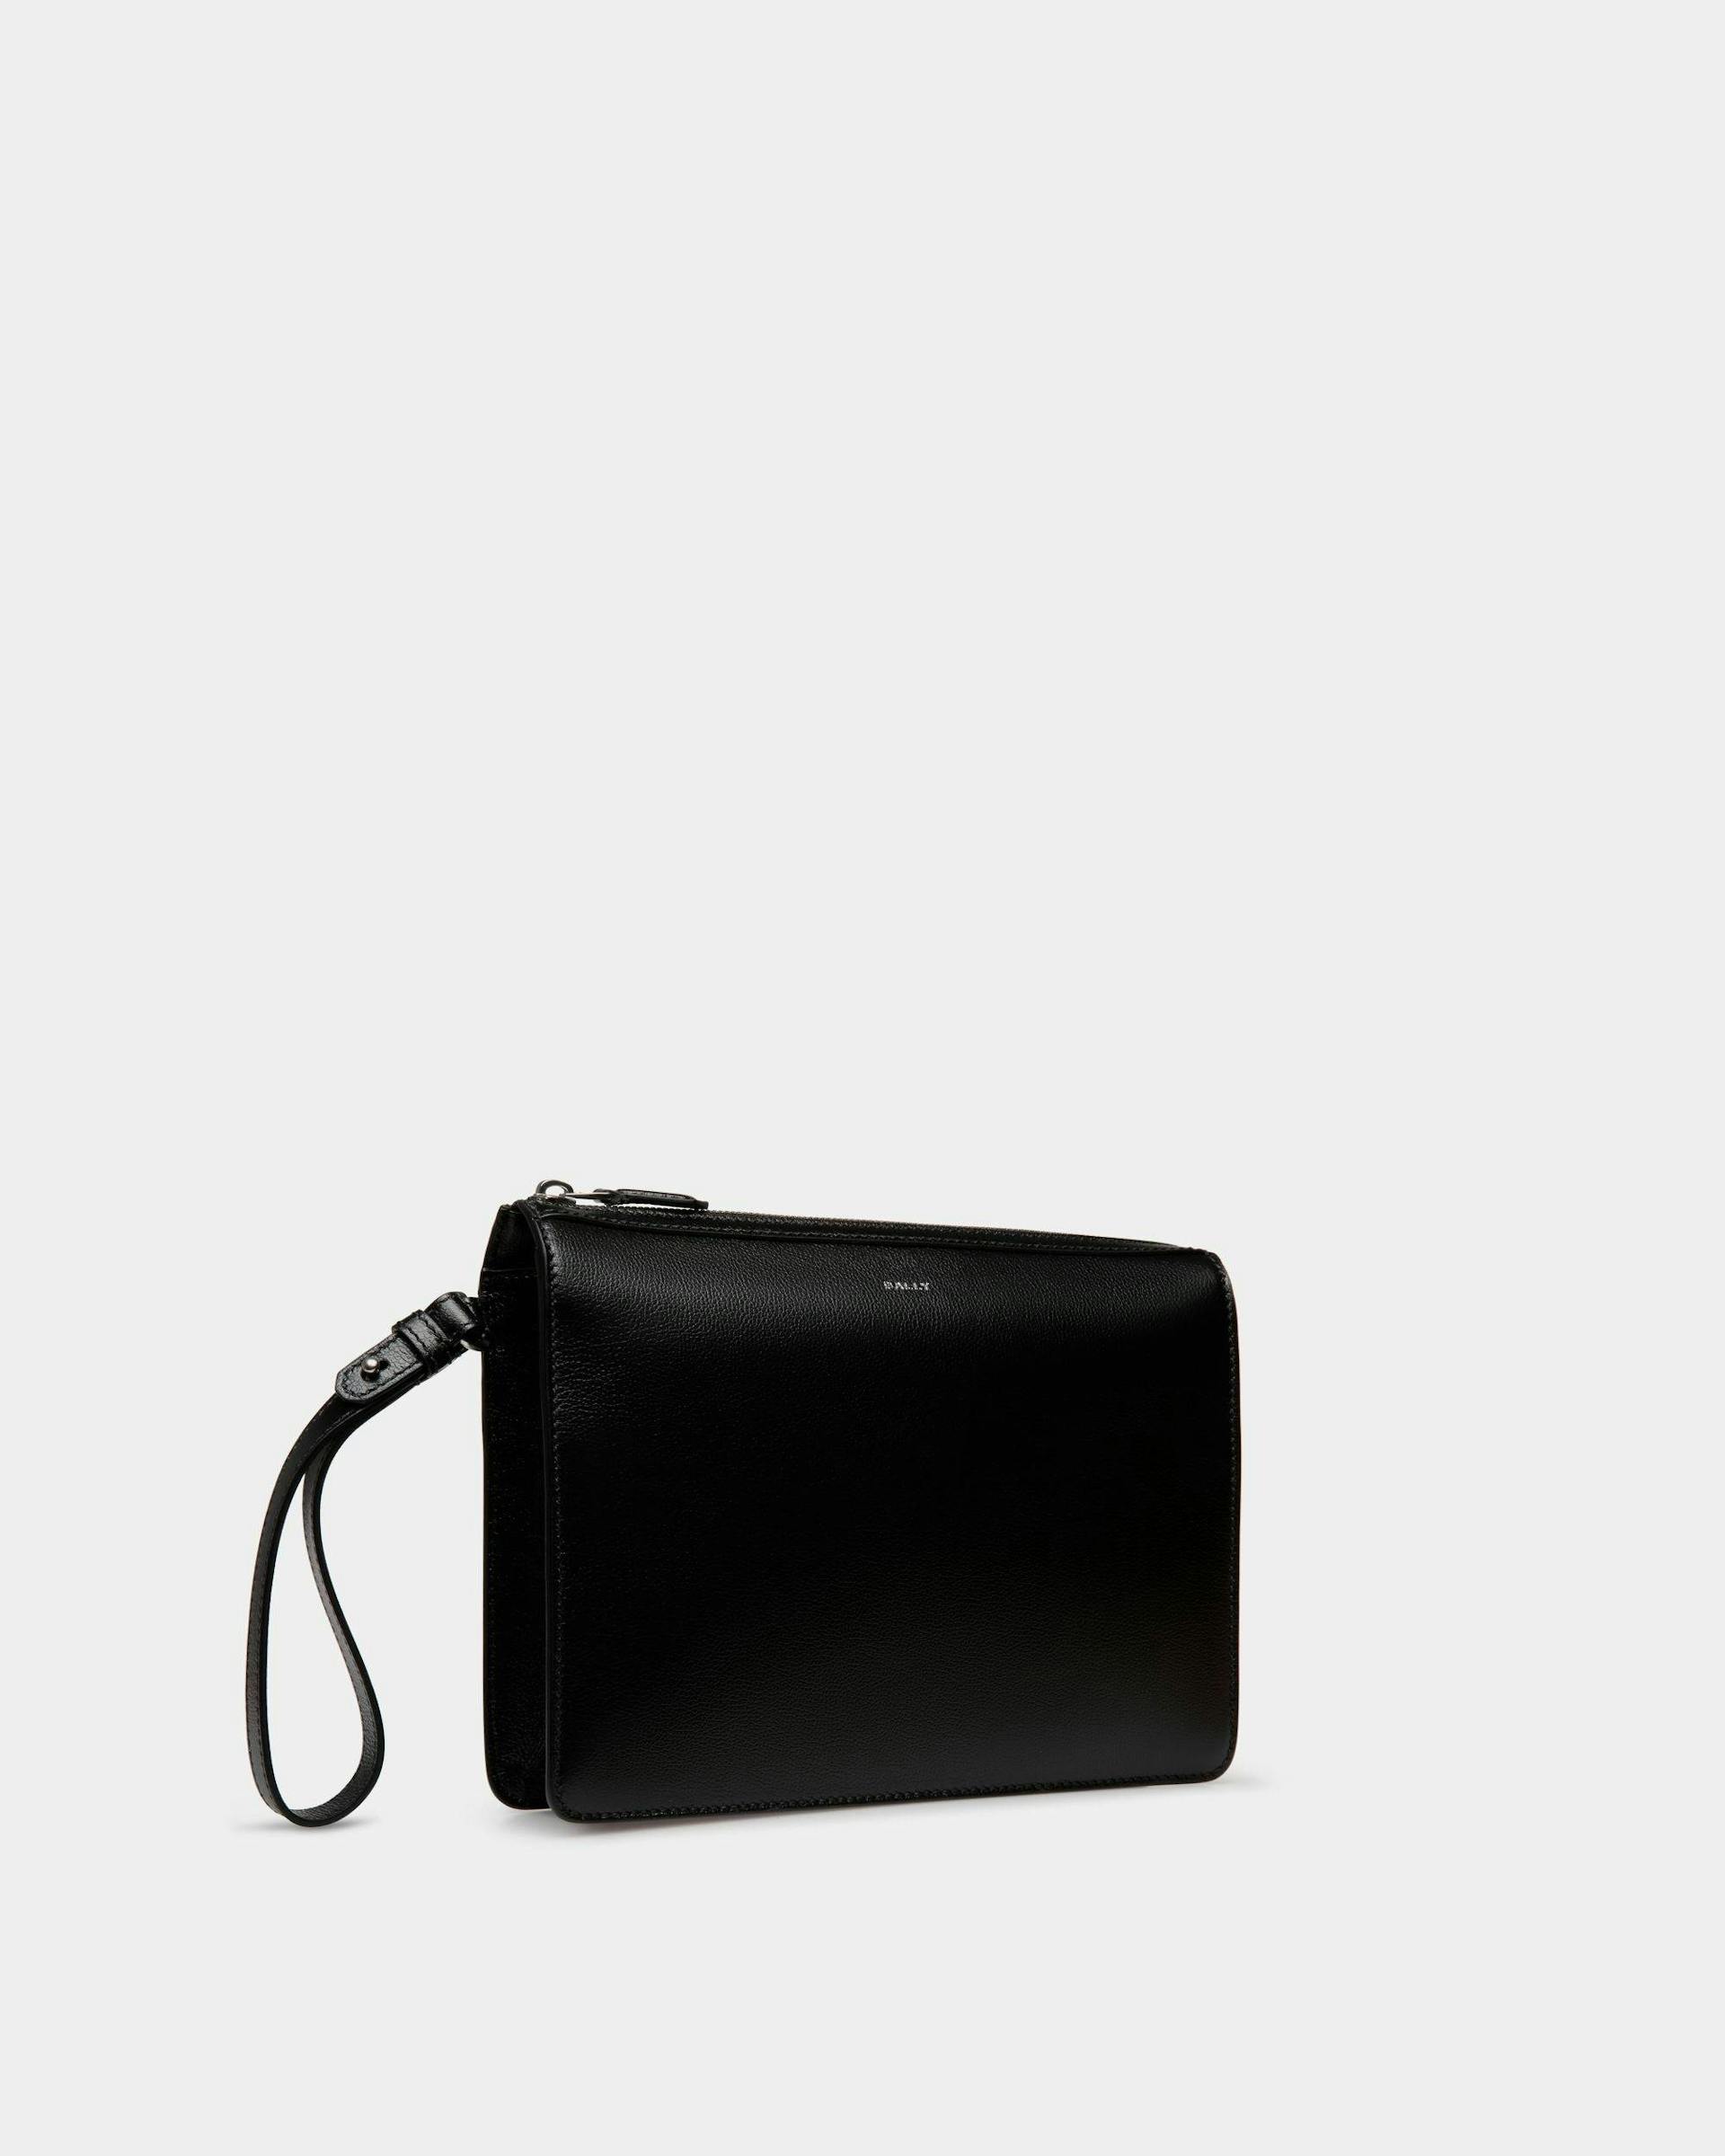 Men's Banque Clutch In Black Leather | Bally | Still Life 3/4 Front